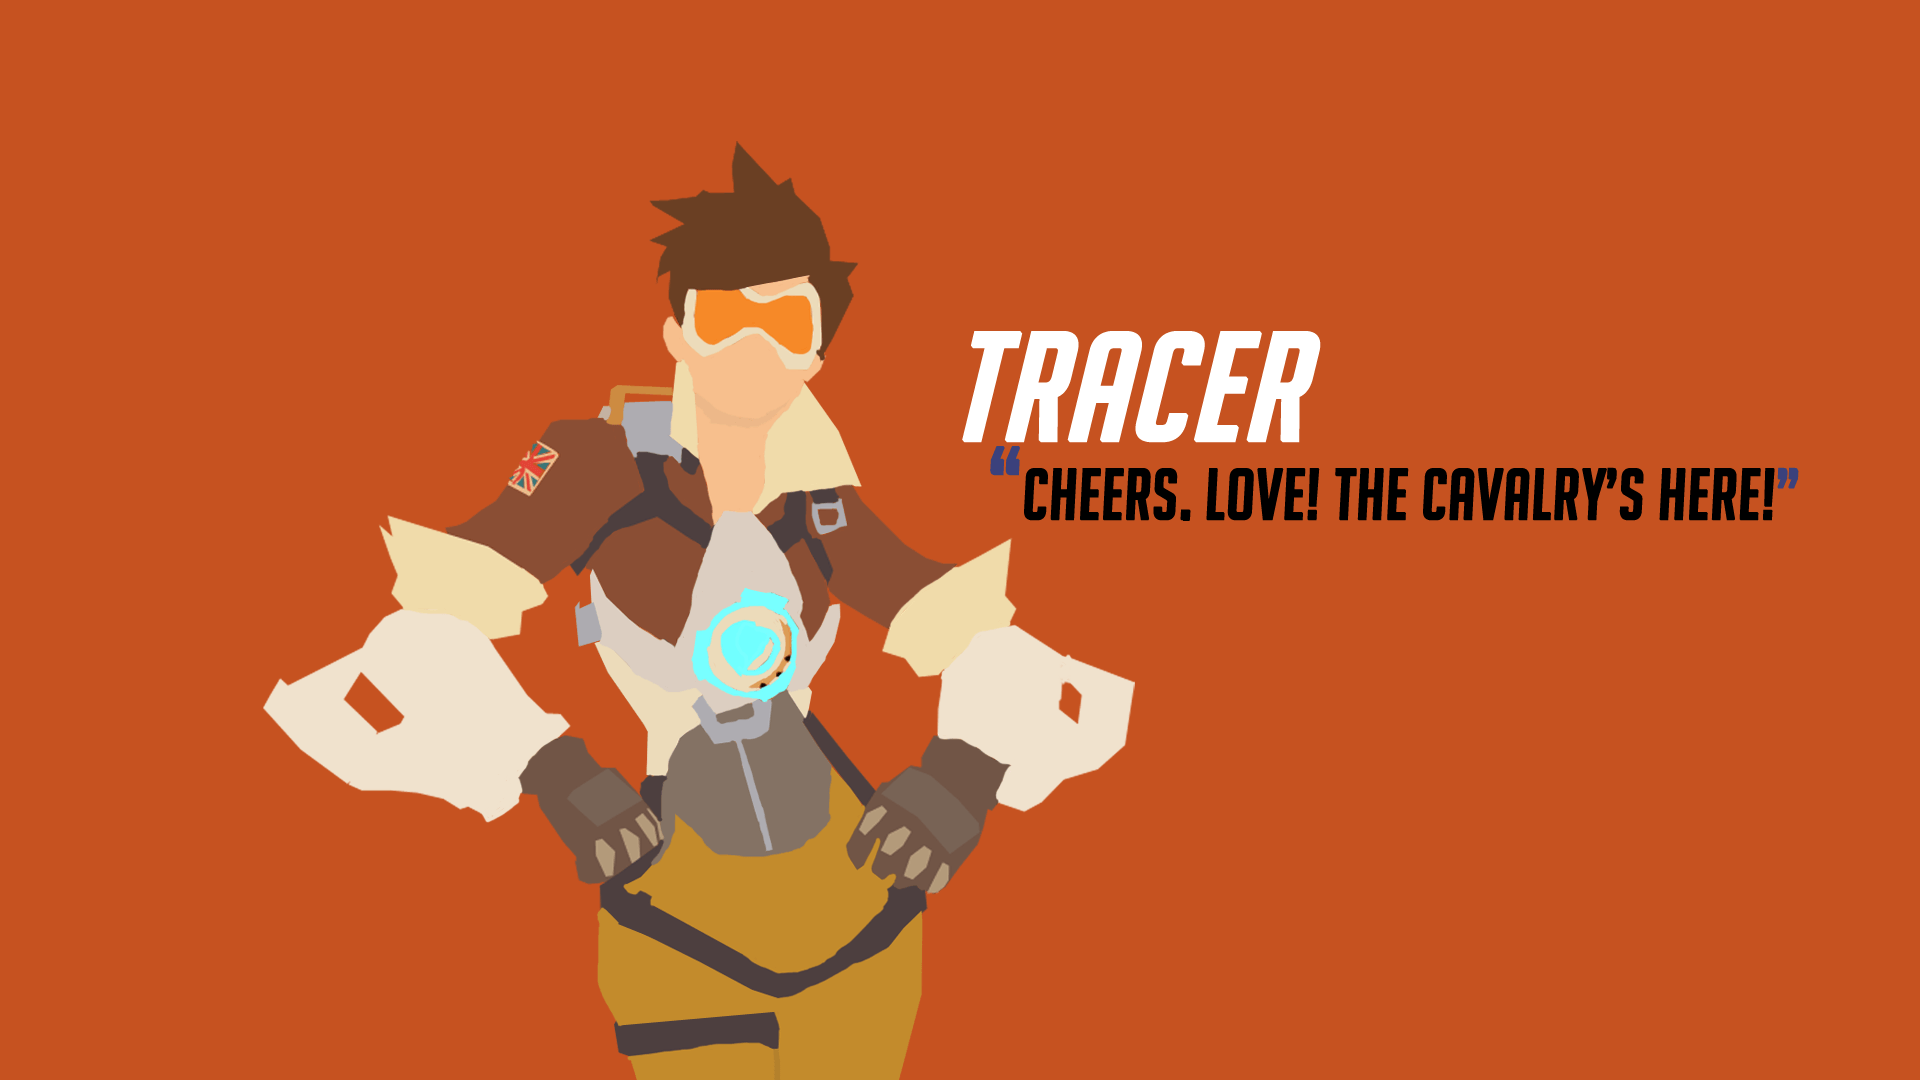 I tried to make a minimalist Tracer wallpaper